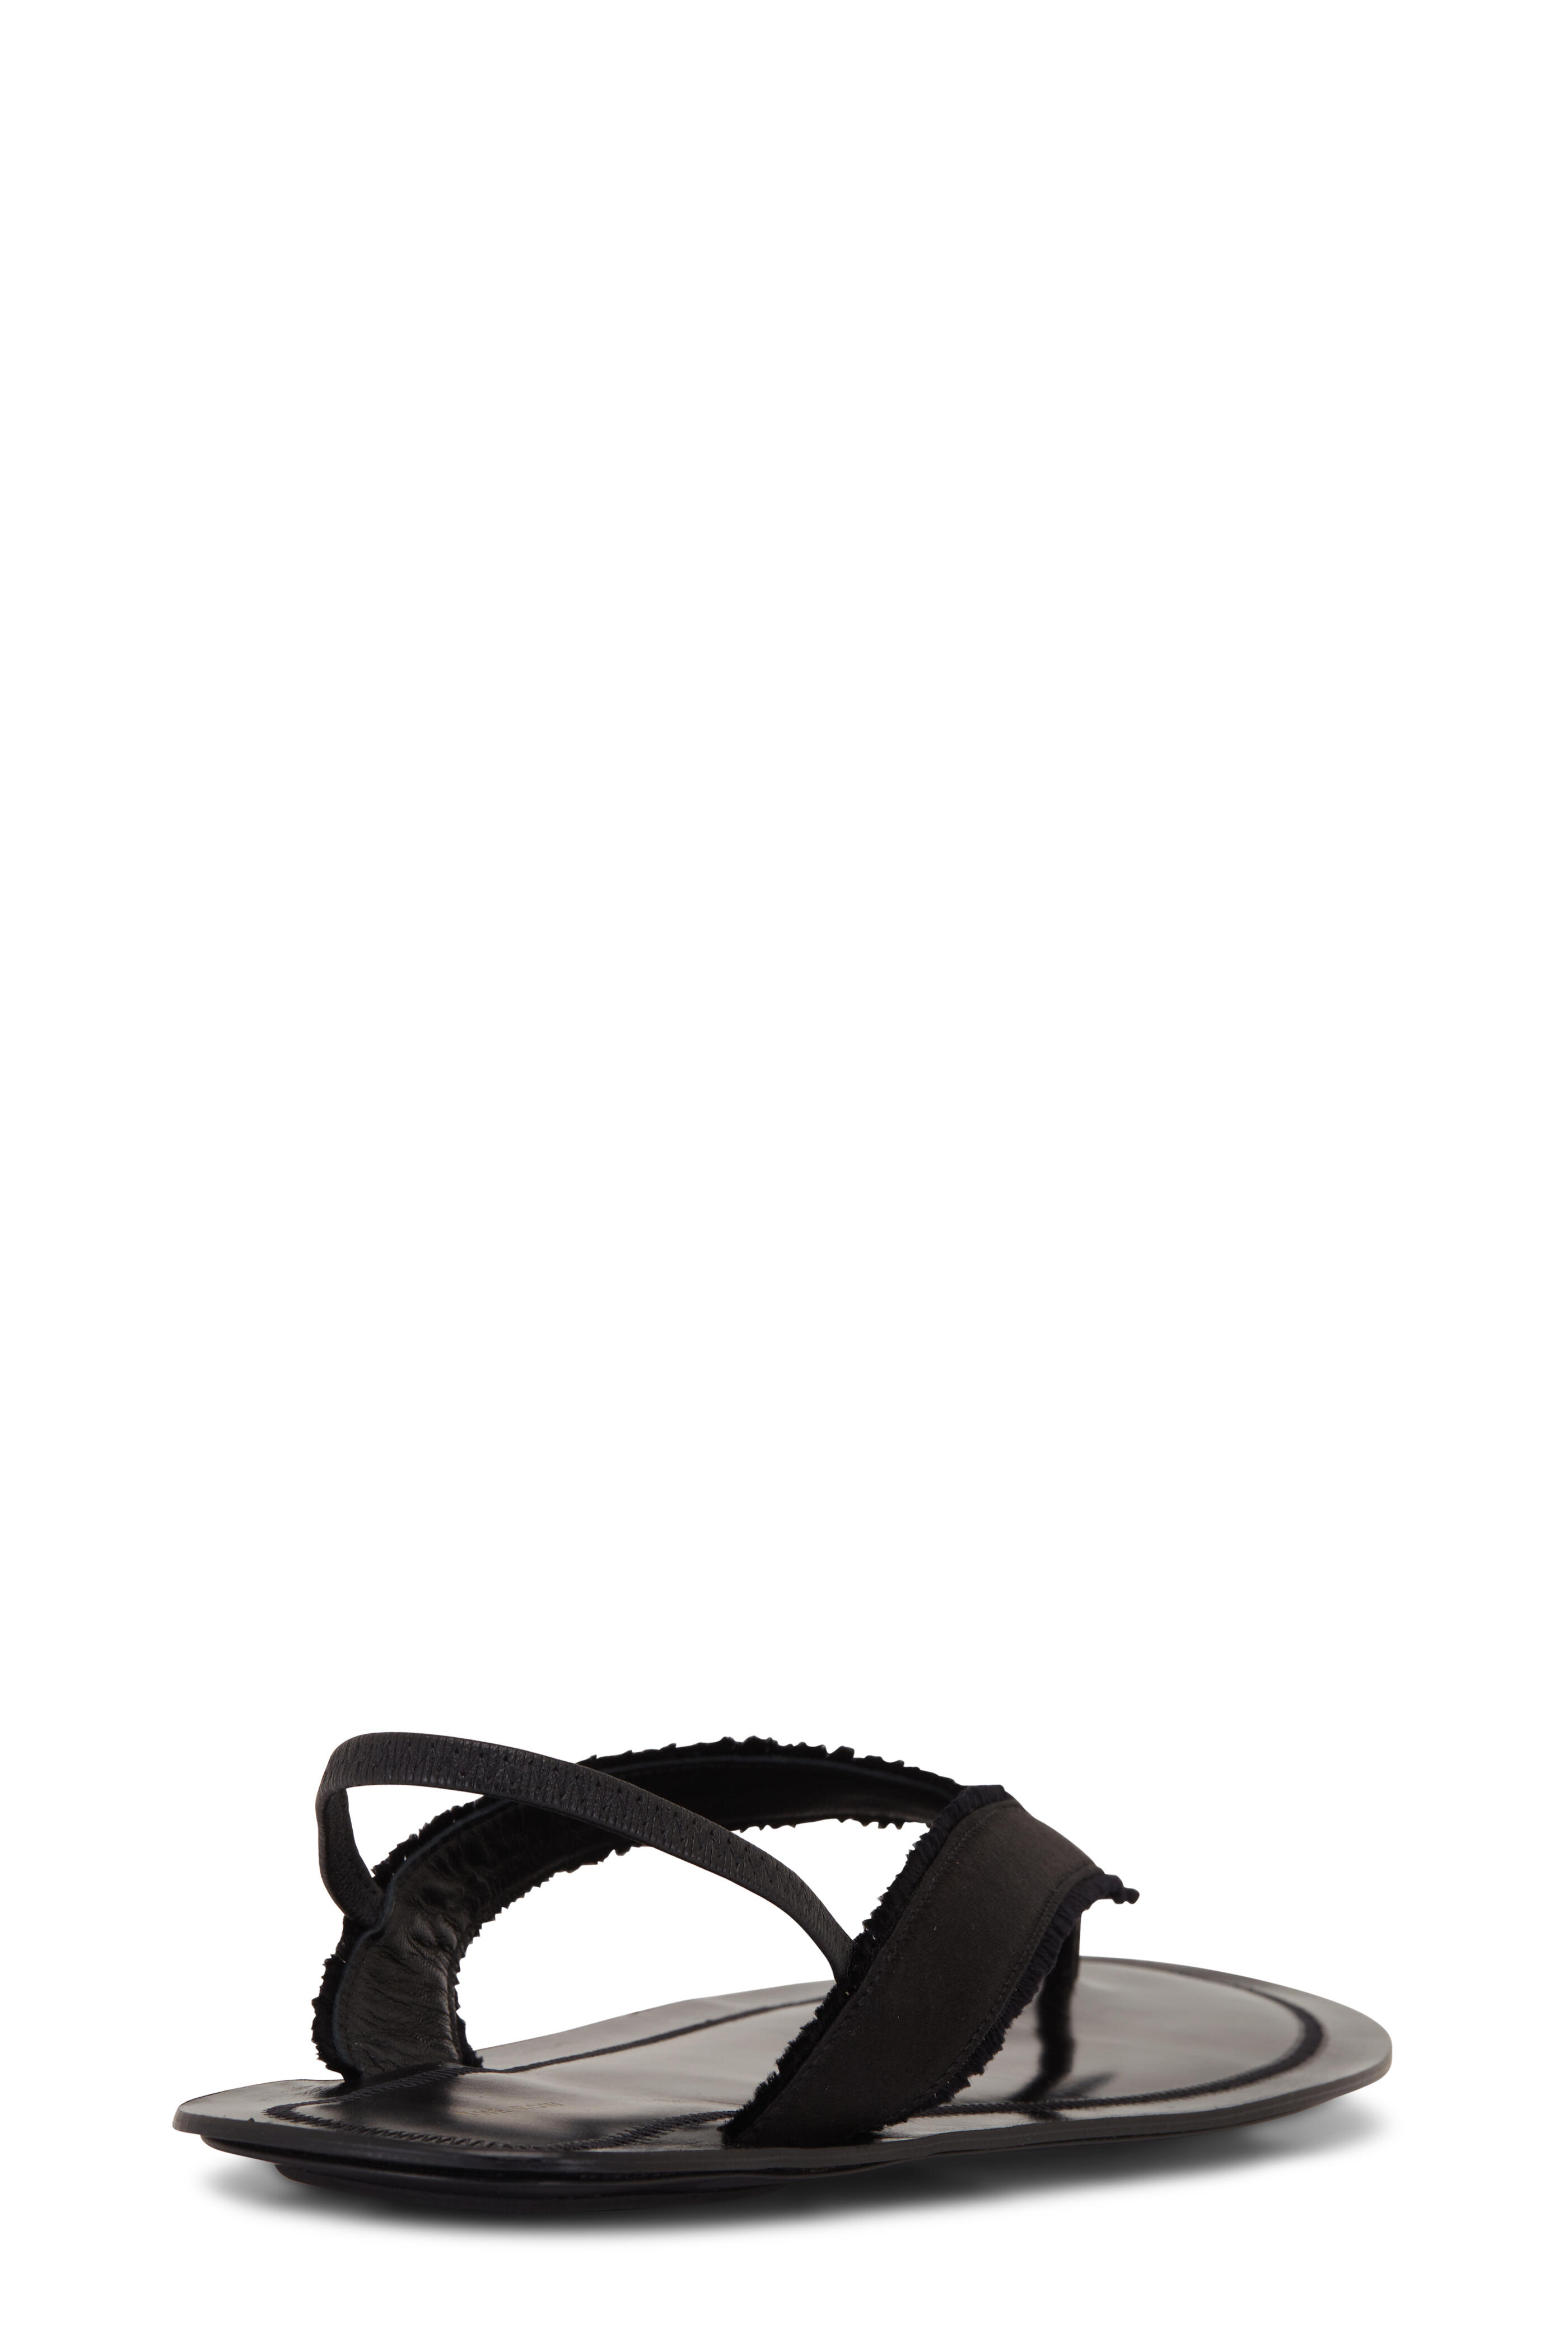 The Row - Fray Black Satin Thong Sandal | Mitchell Stores